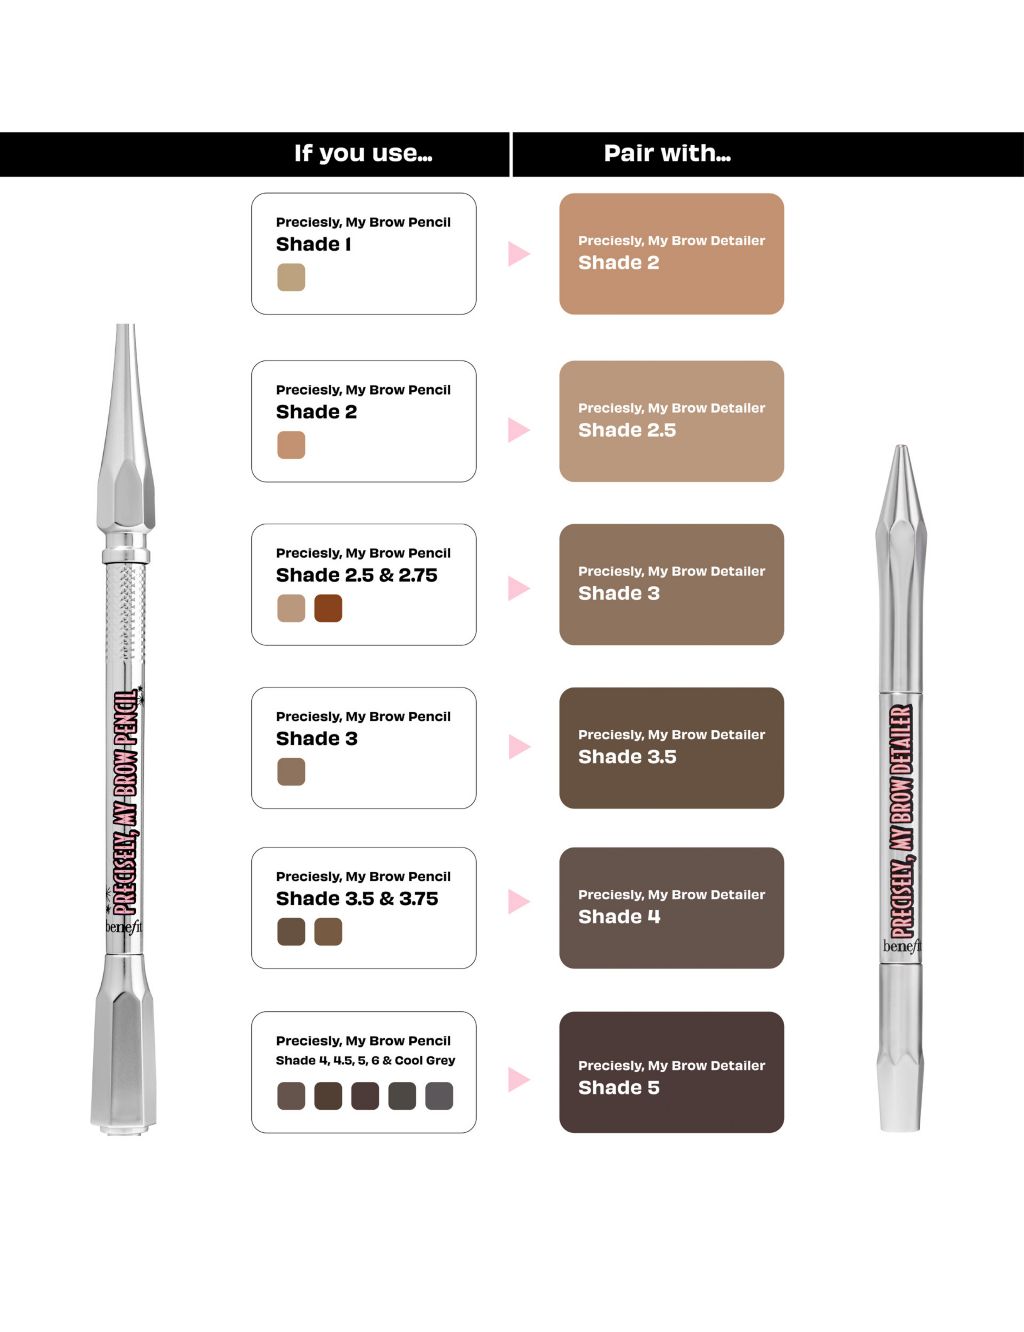 Precisely My Brow Detailer Pencil 2 of 5